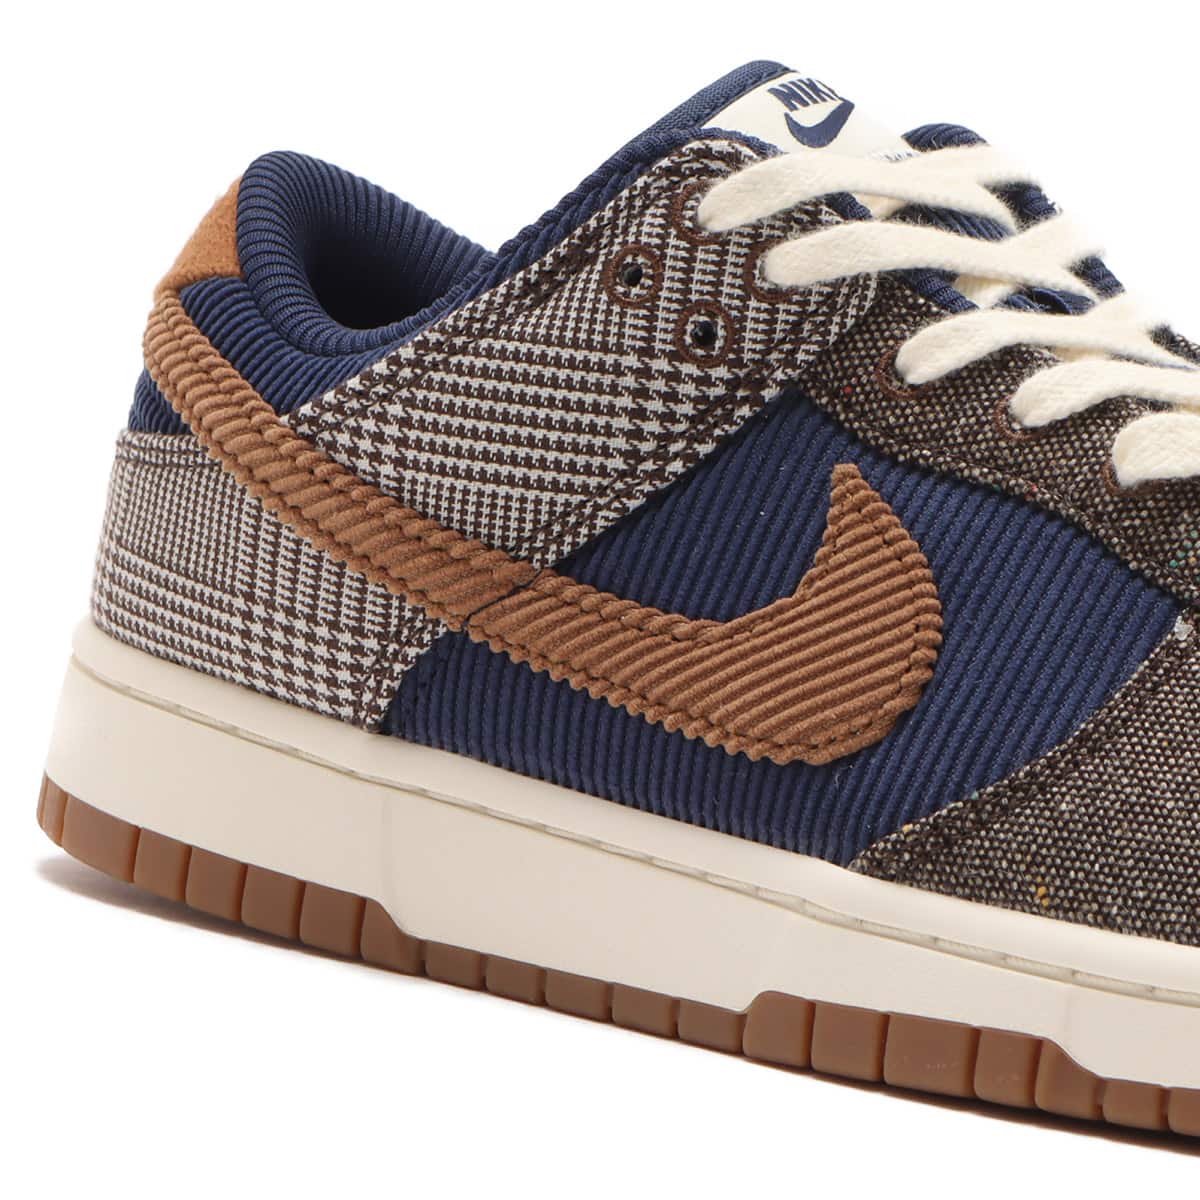 NIKE DUNK LOW PRM MIDNIGHT NAVY/ALE BROWN-PALE IVORY 23HO-I